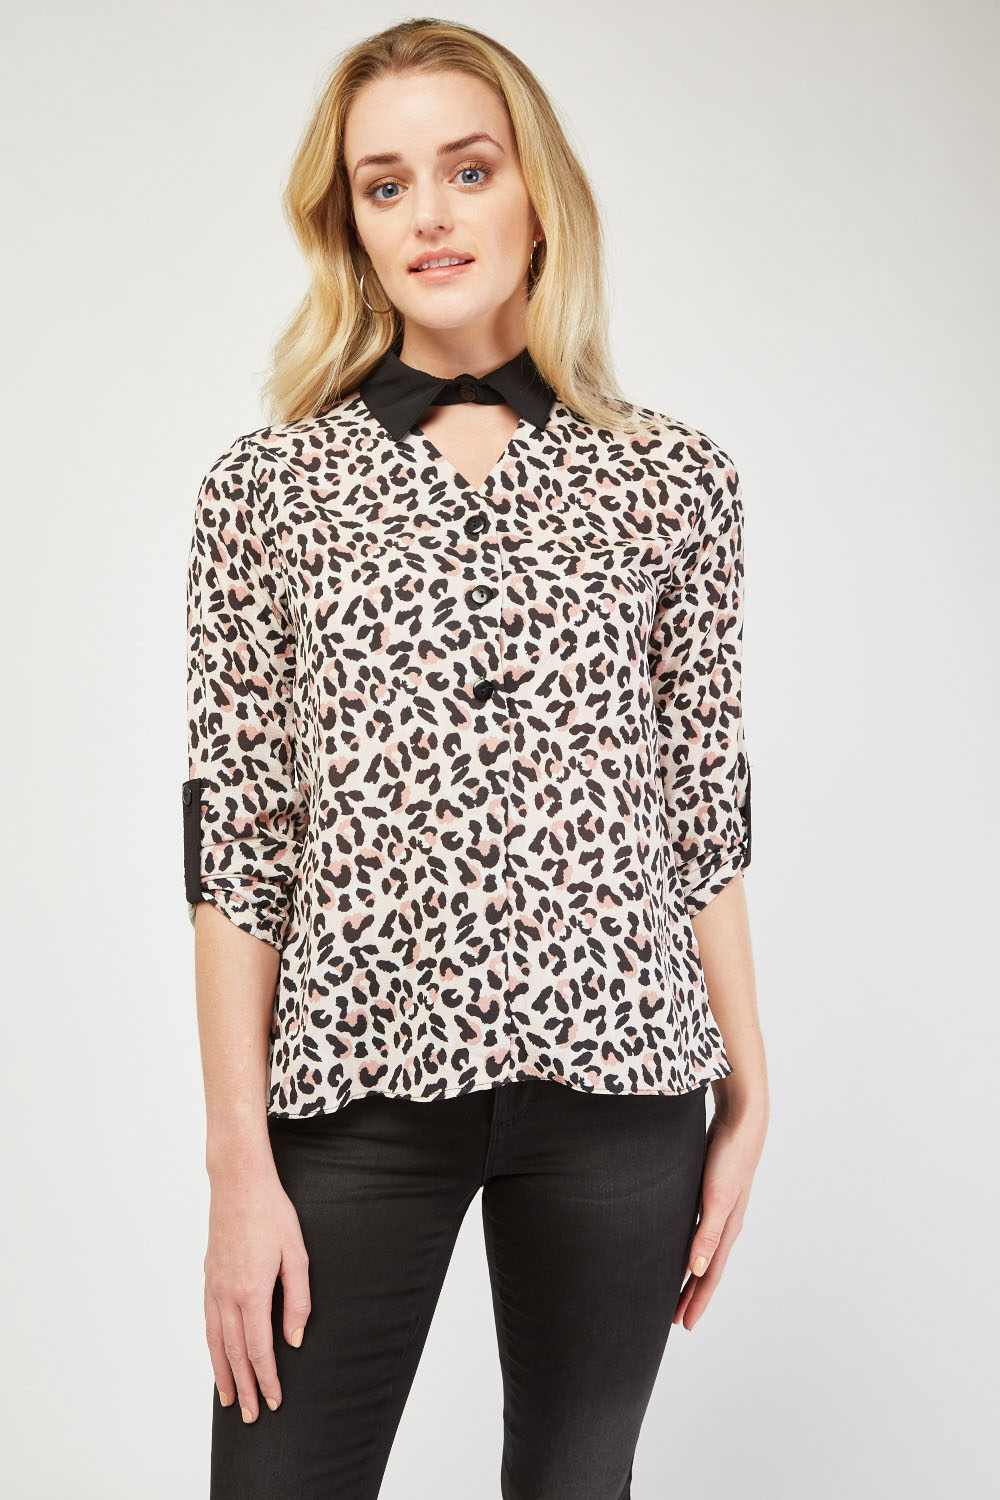 Leopard Print Collared Blouse - Just $3